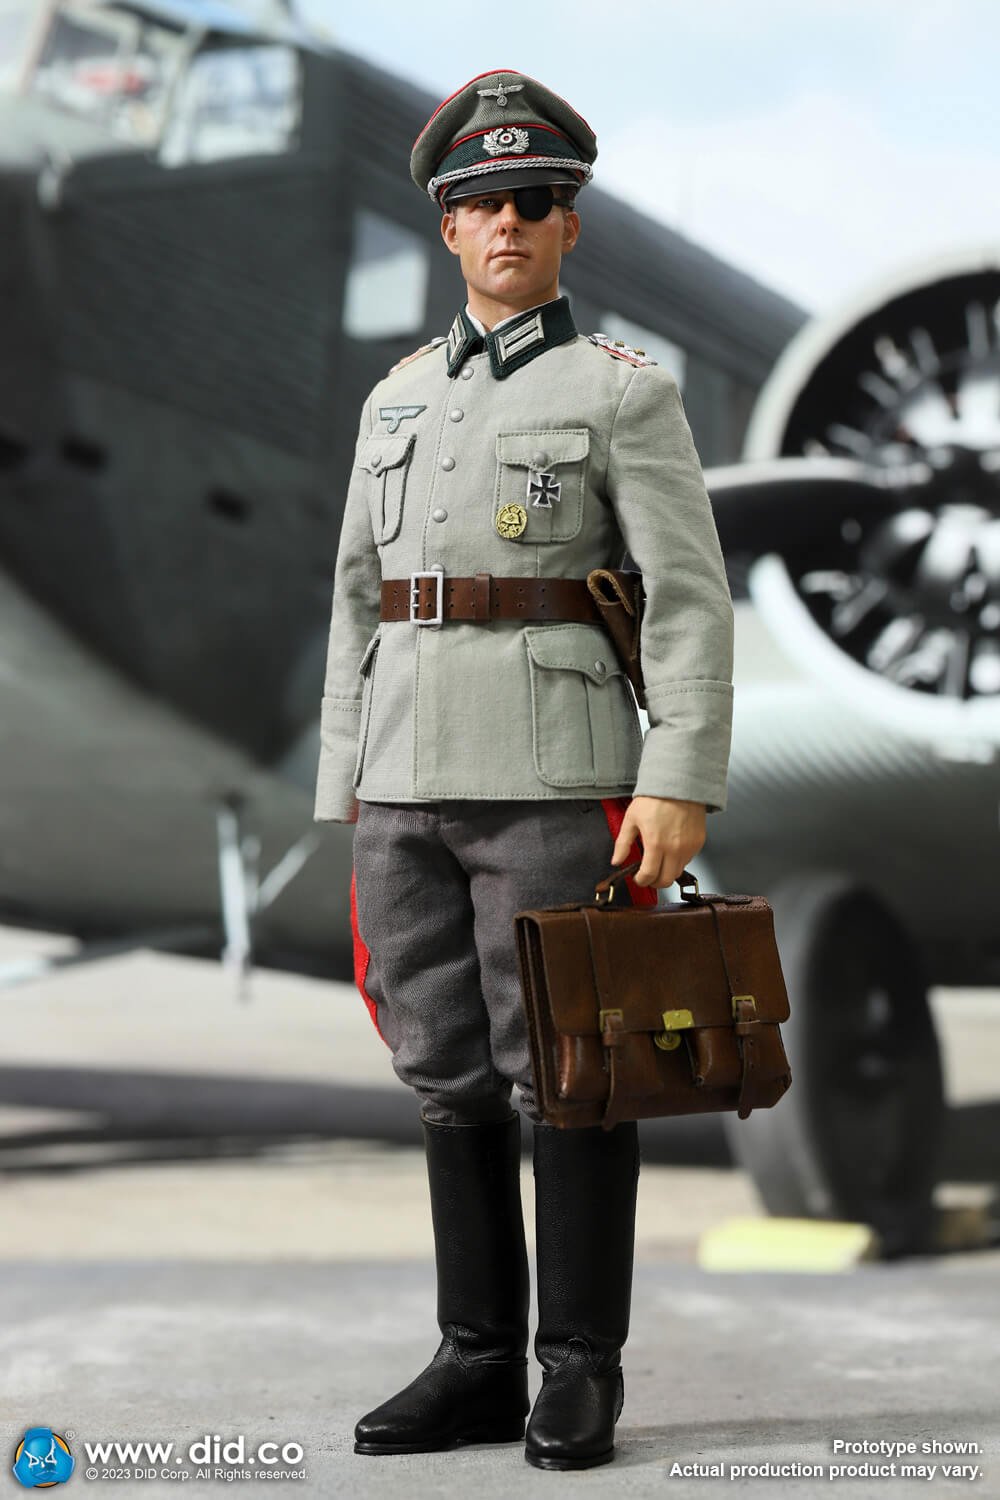 Historical - NEW PRODUCT: DiD: D80162 Oberst I.G. Claus Von Stauffenberg  OPERATION VALKYRIE 11897